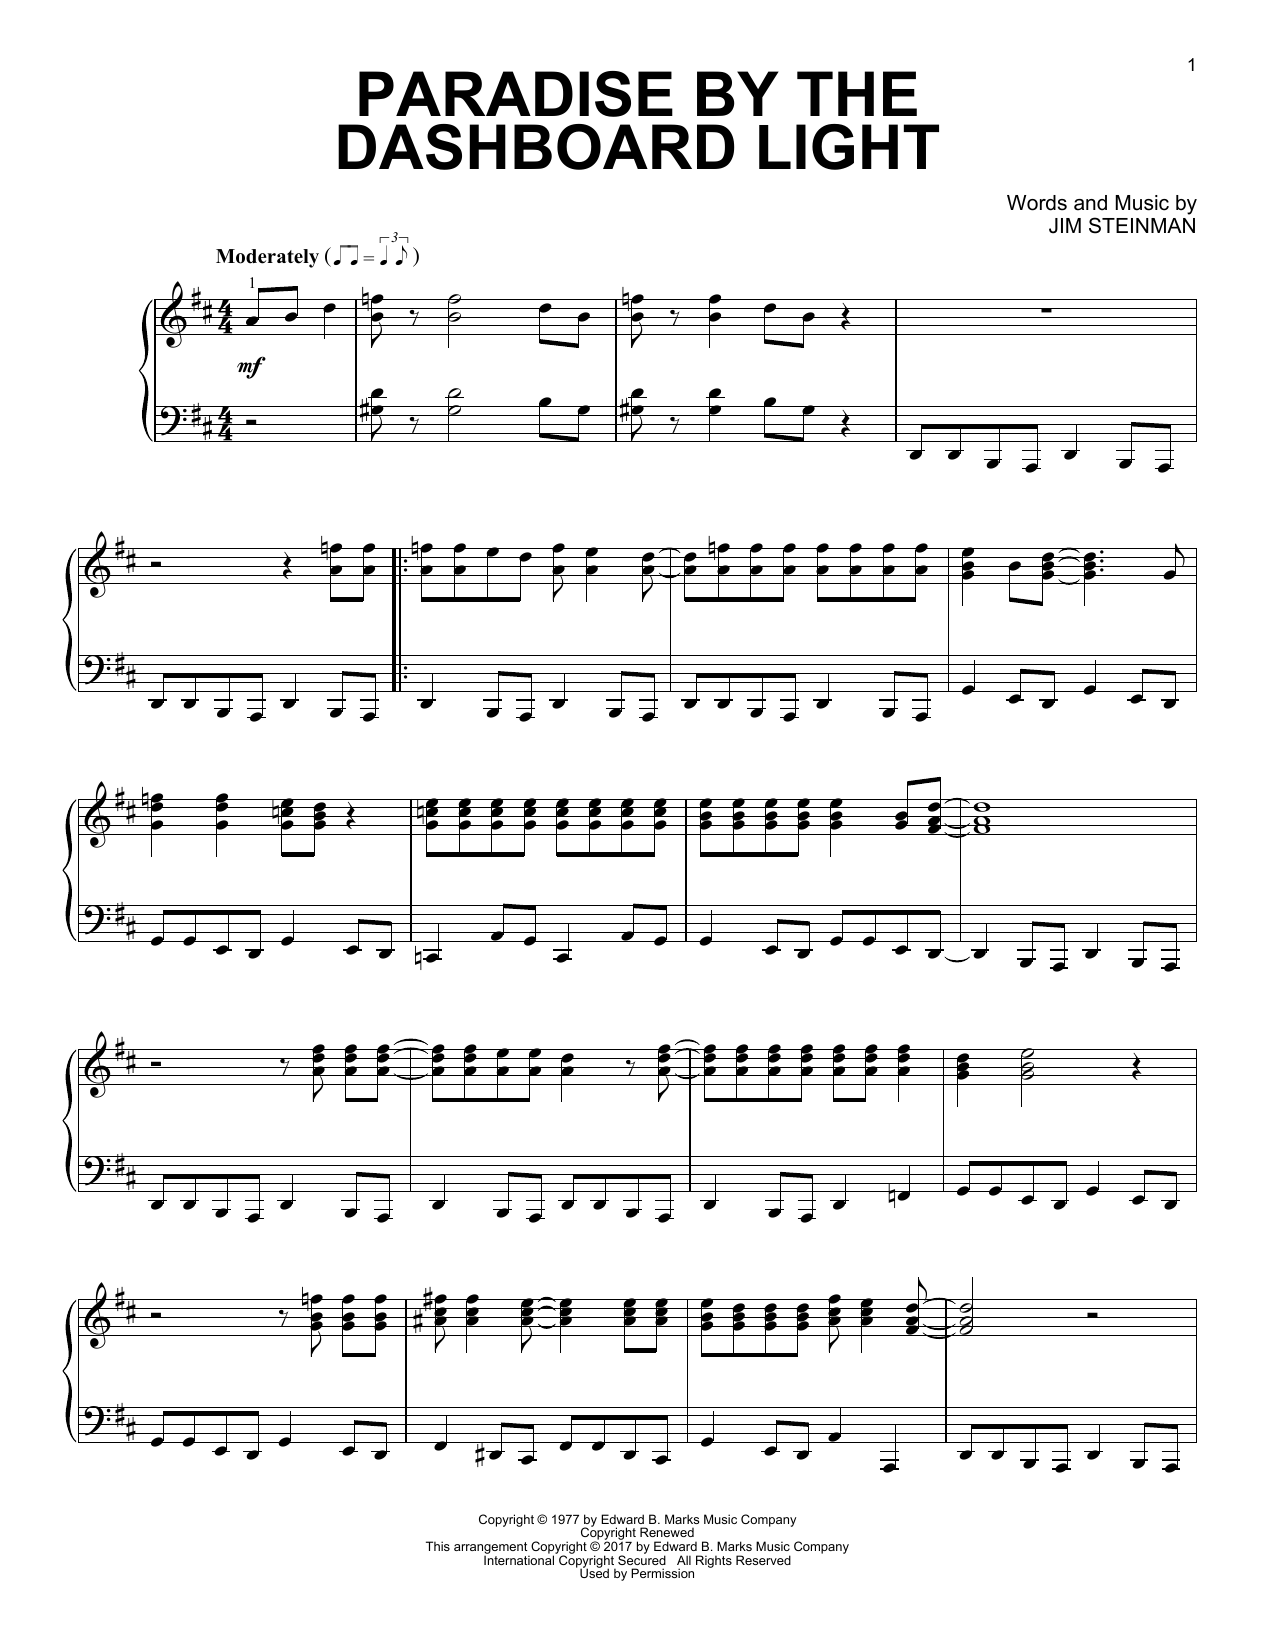 Meat Loaf "Paradise By The Dashboard Light" Sheet Music Notes, Chords